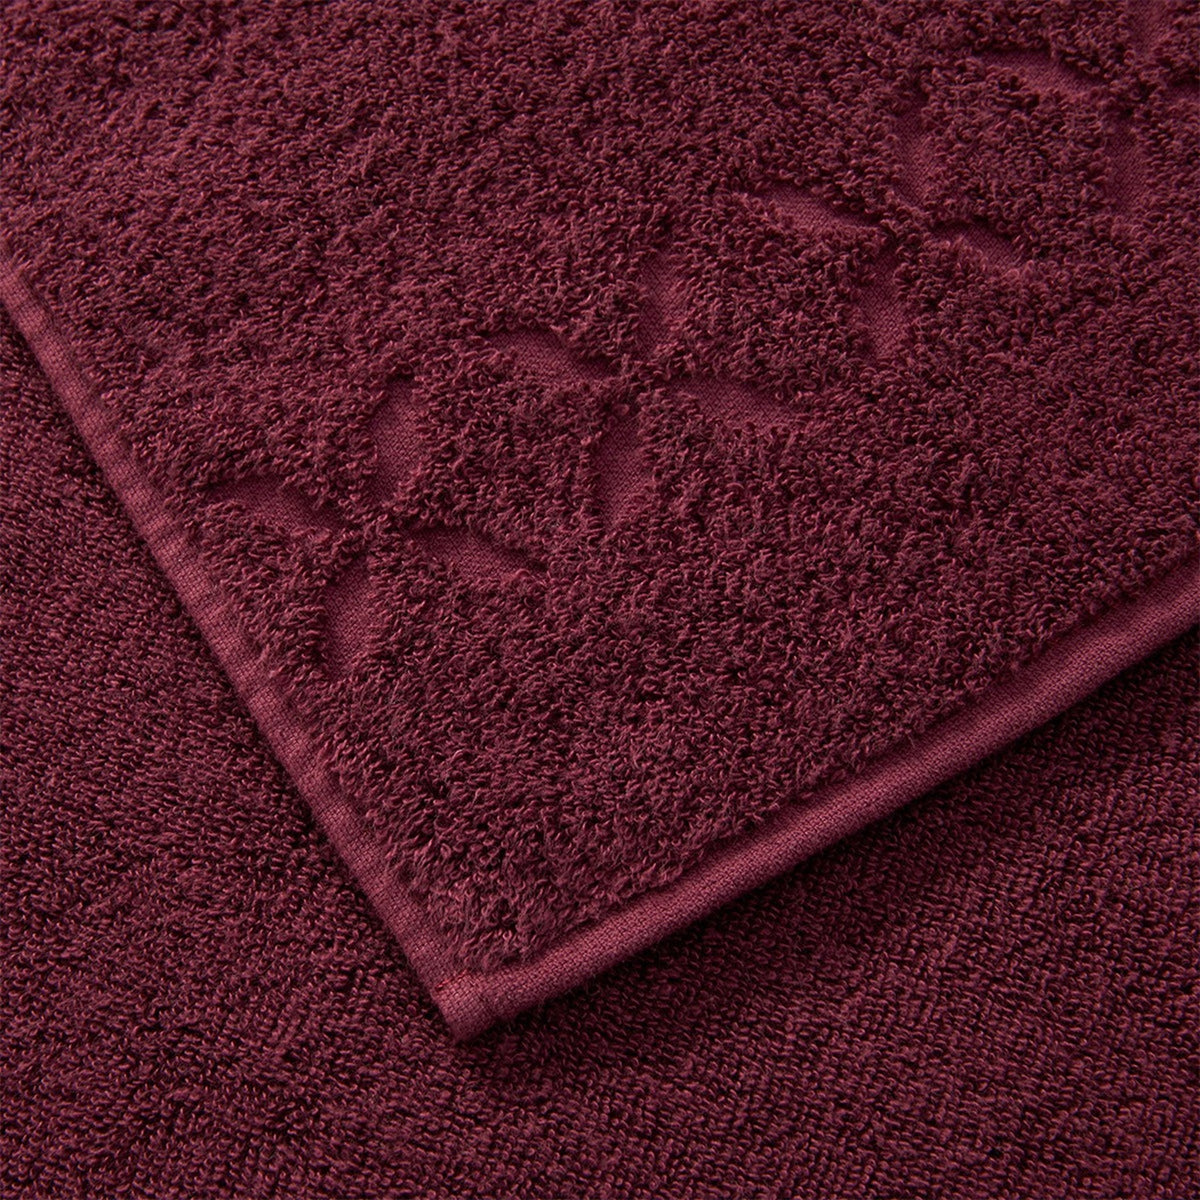 Close Up Image of Yves Delorme Nature Bath Towels and Mats in Prune Color